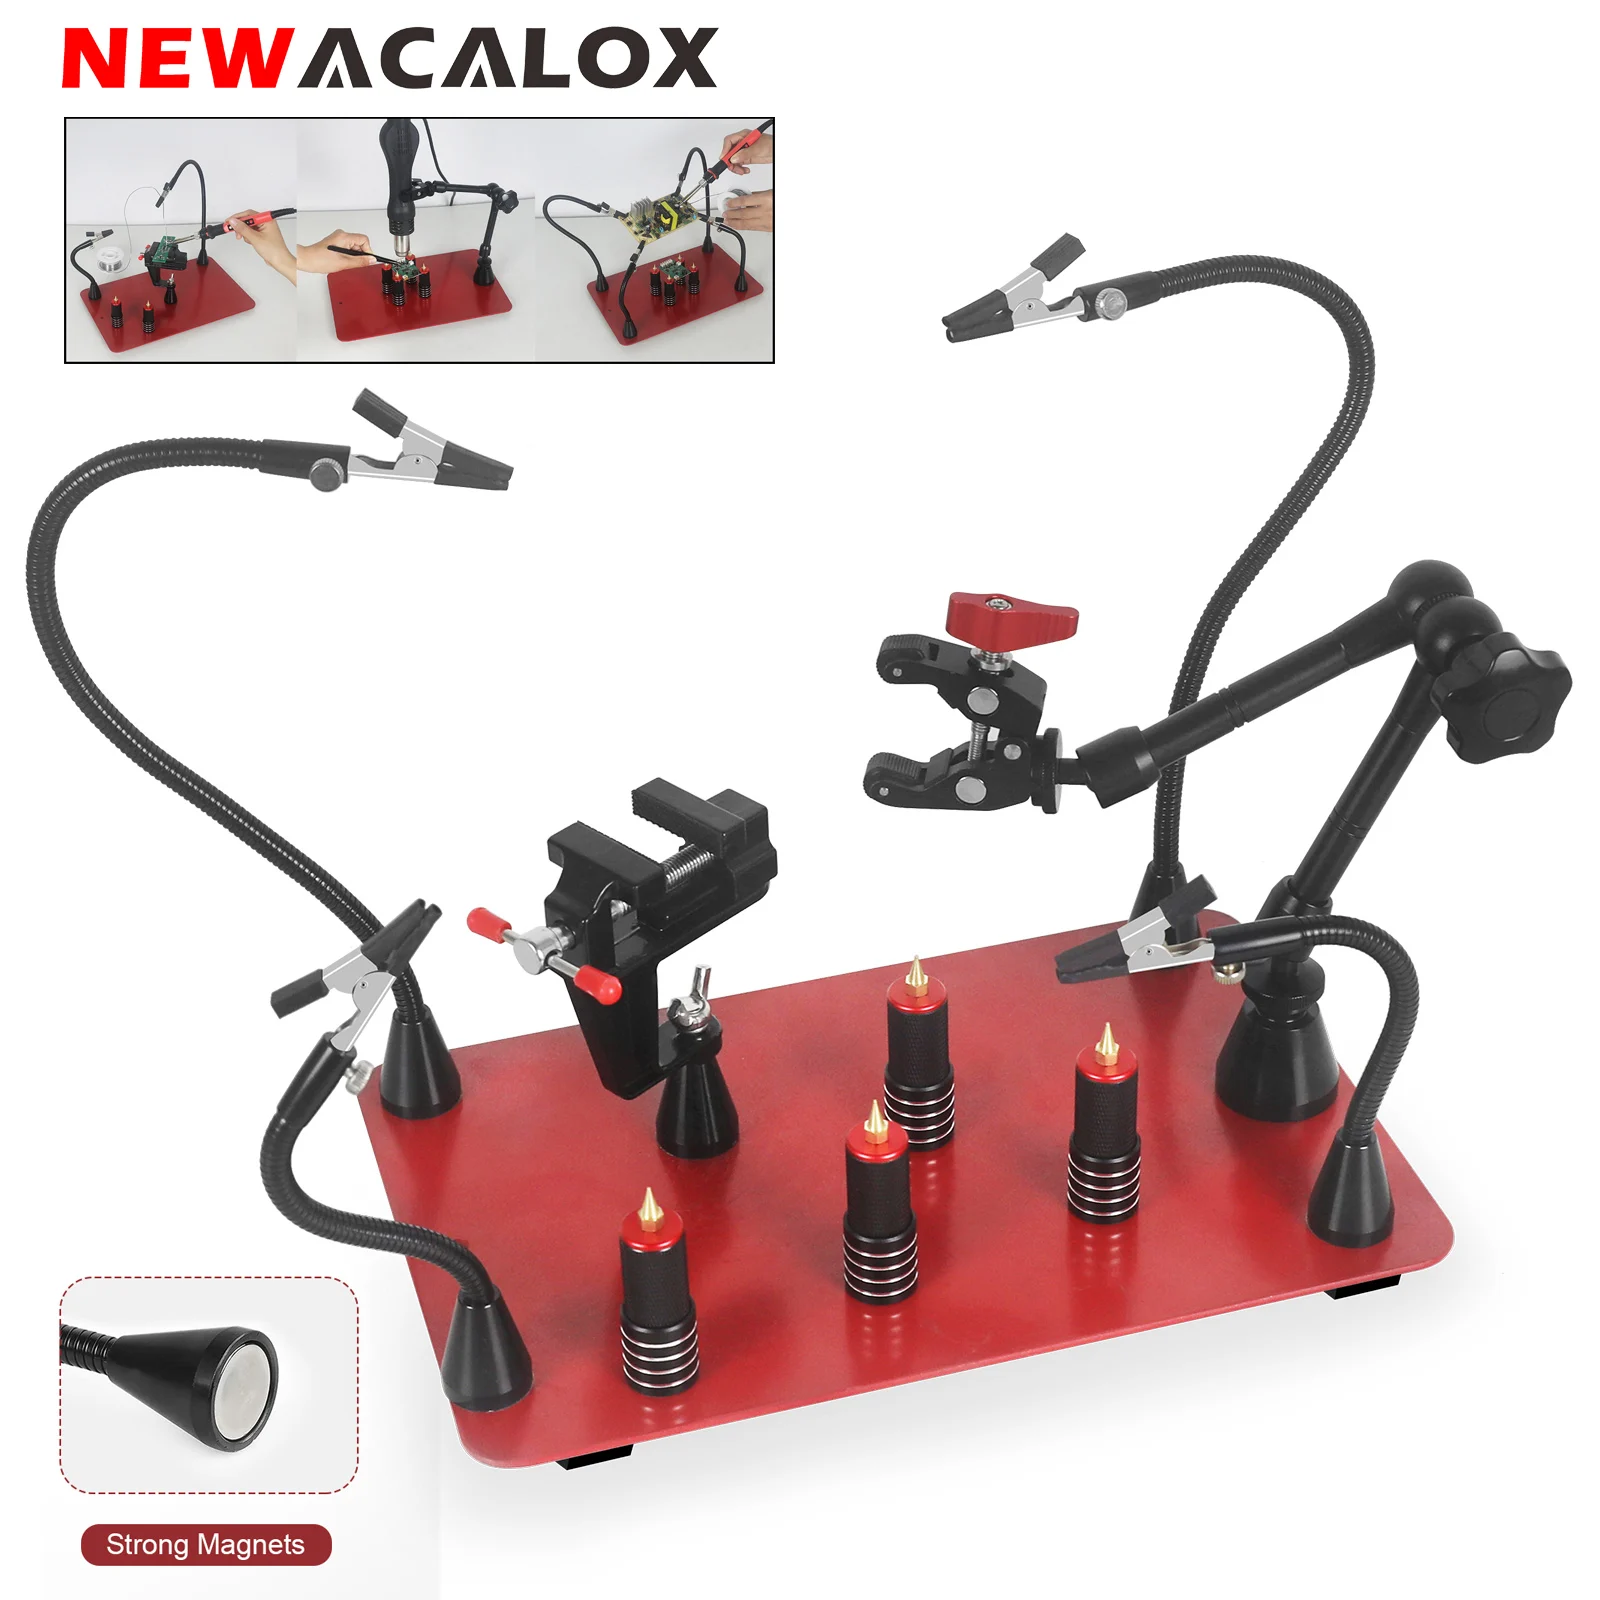 NEWACALOX Magnetic Helping Hands Soldering Third Hand PCB Circuit Board Holder 360° Hot Air Gun Holder for Soldering Station